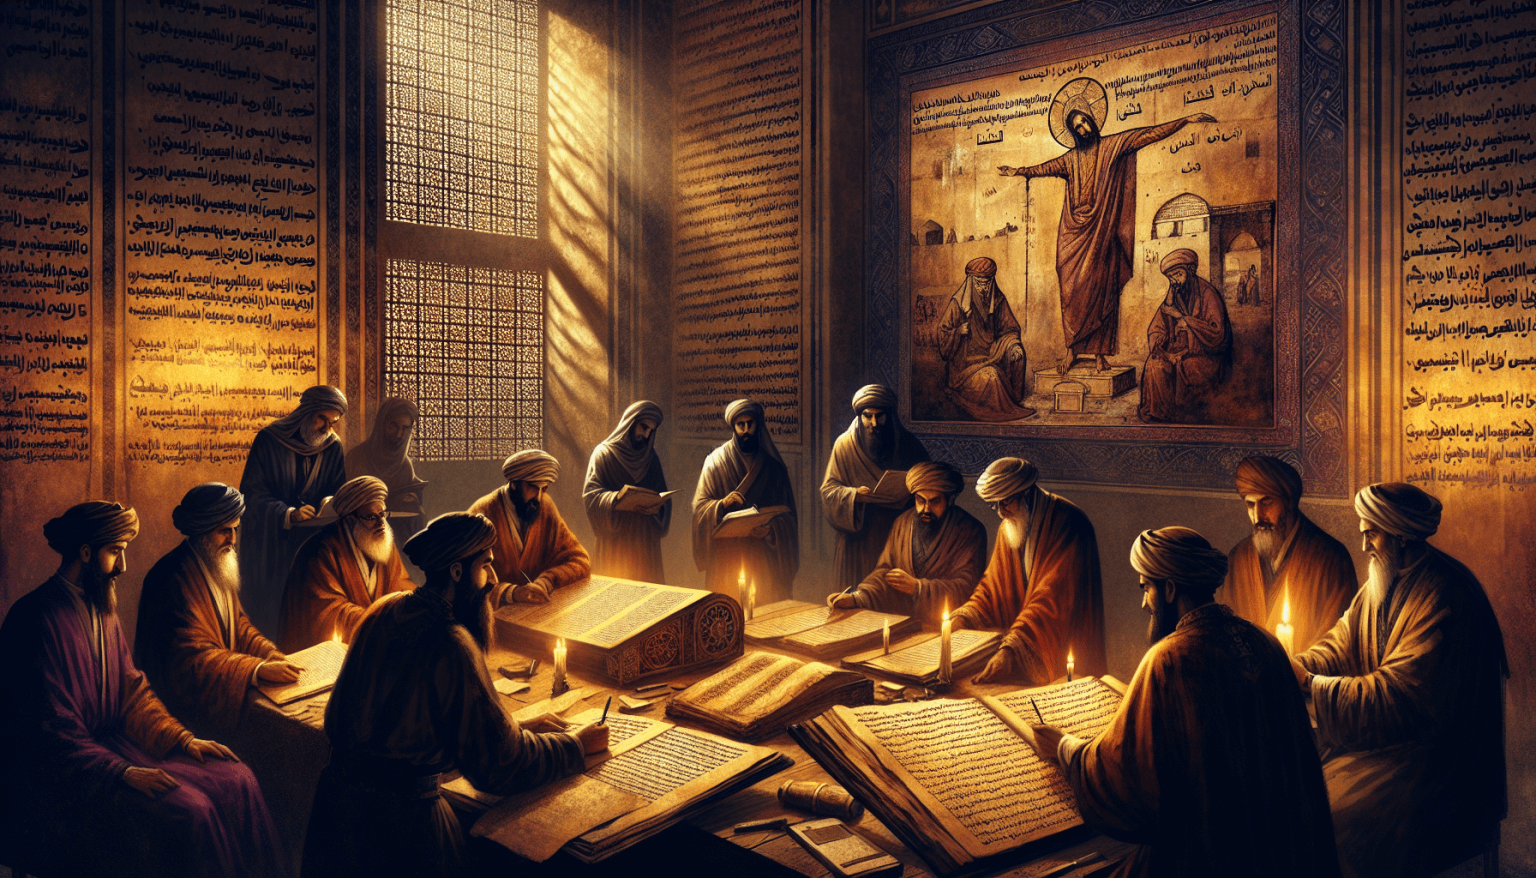 An ancient, candlelit manuscript room with scholars in traditional Middle Eastern attire examining texts and artifacts related to the death of the Apostle Matthew, with a dramatic depiction of his mar